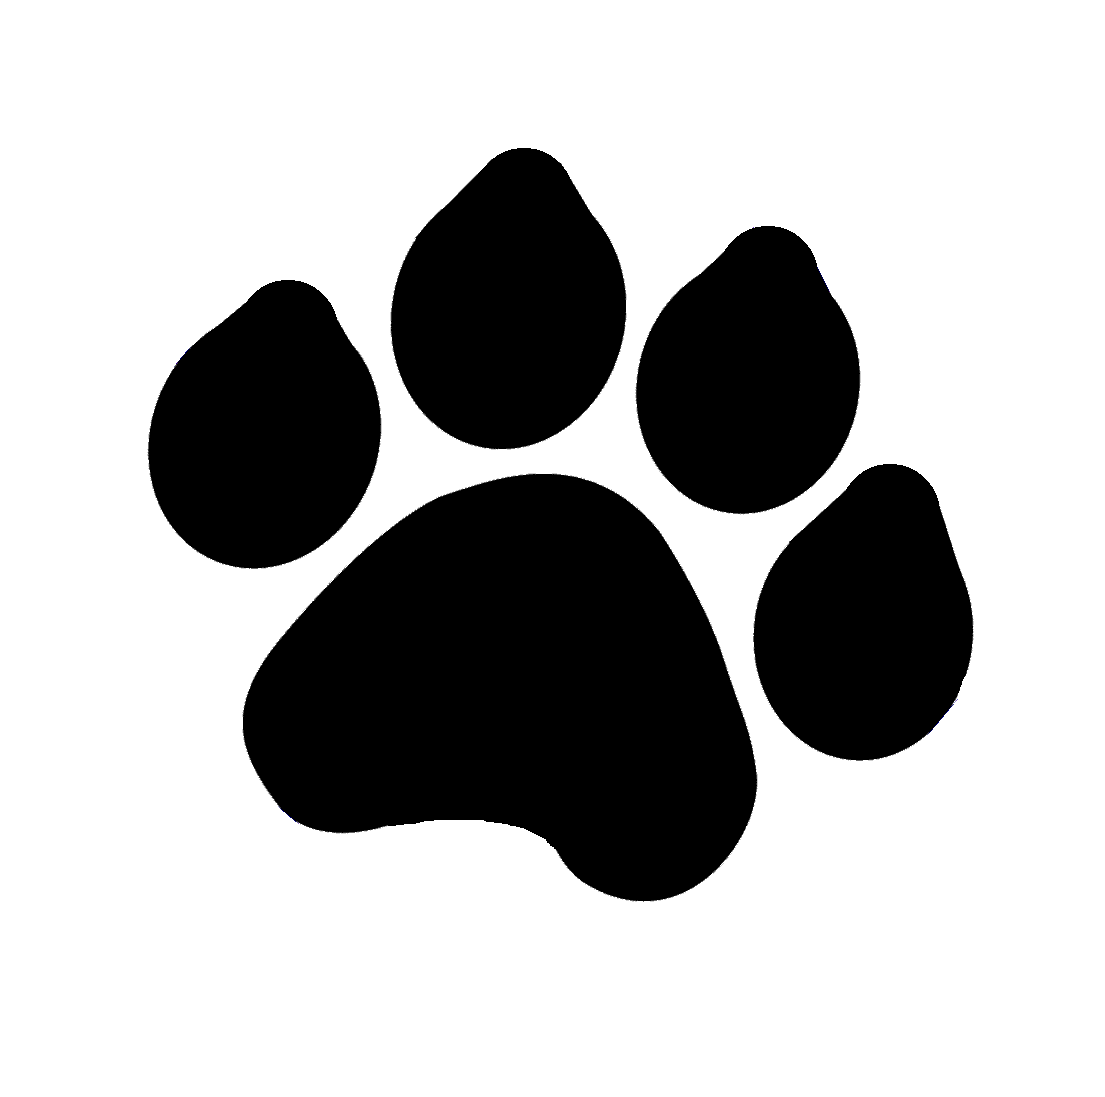 Paw Print Gif - ClipArt Best